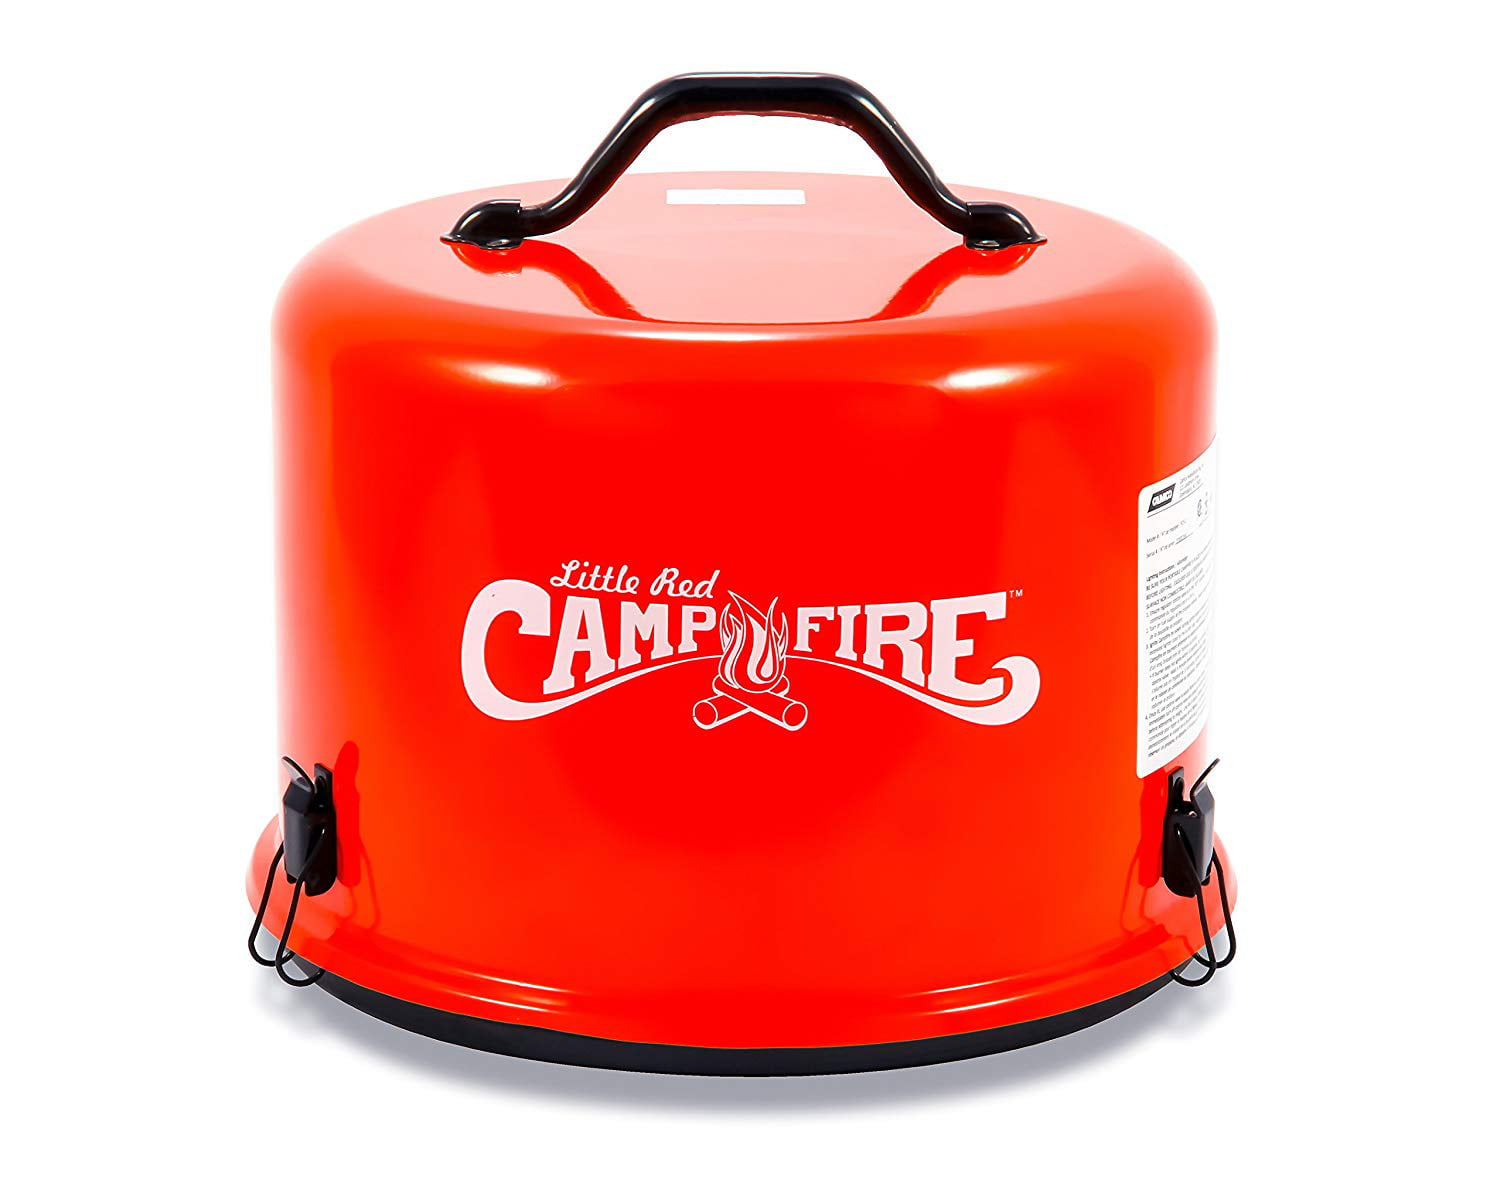 Camco Little Red Campfire 11.25-Inch Portable Propane ...